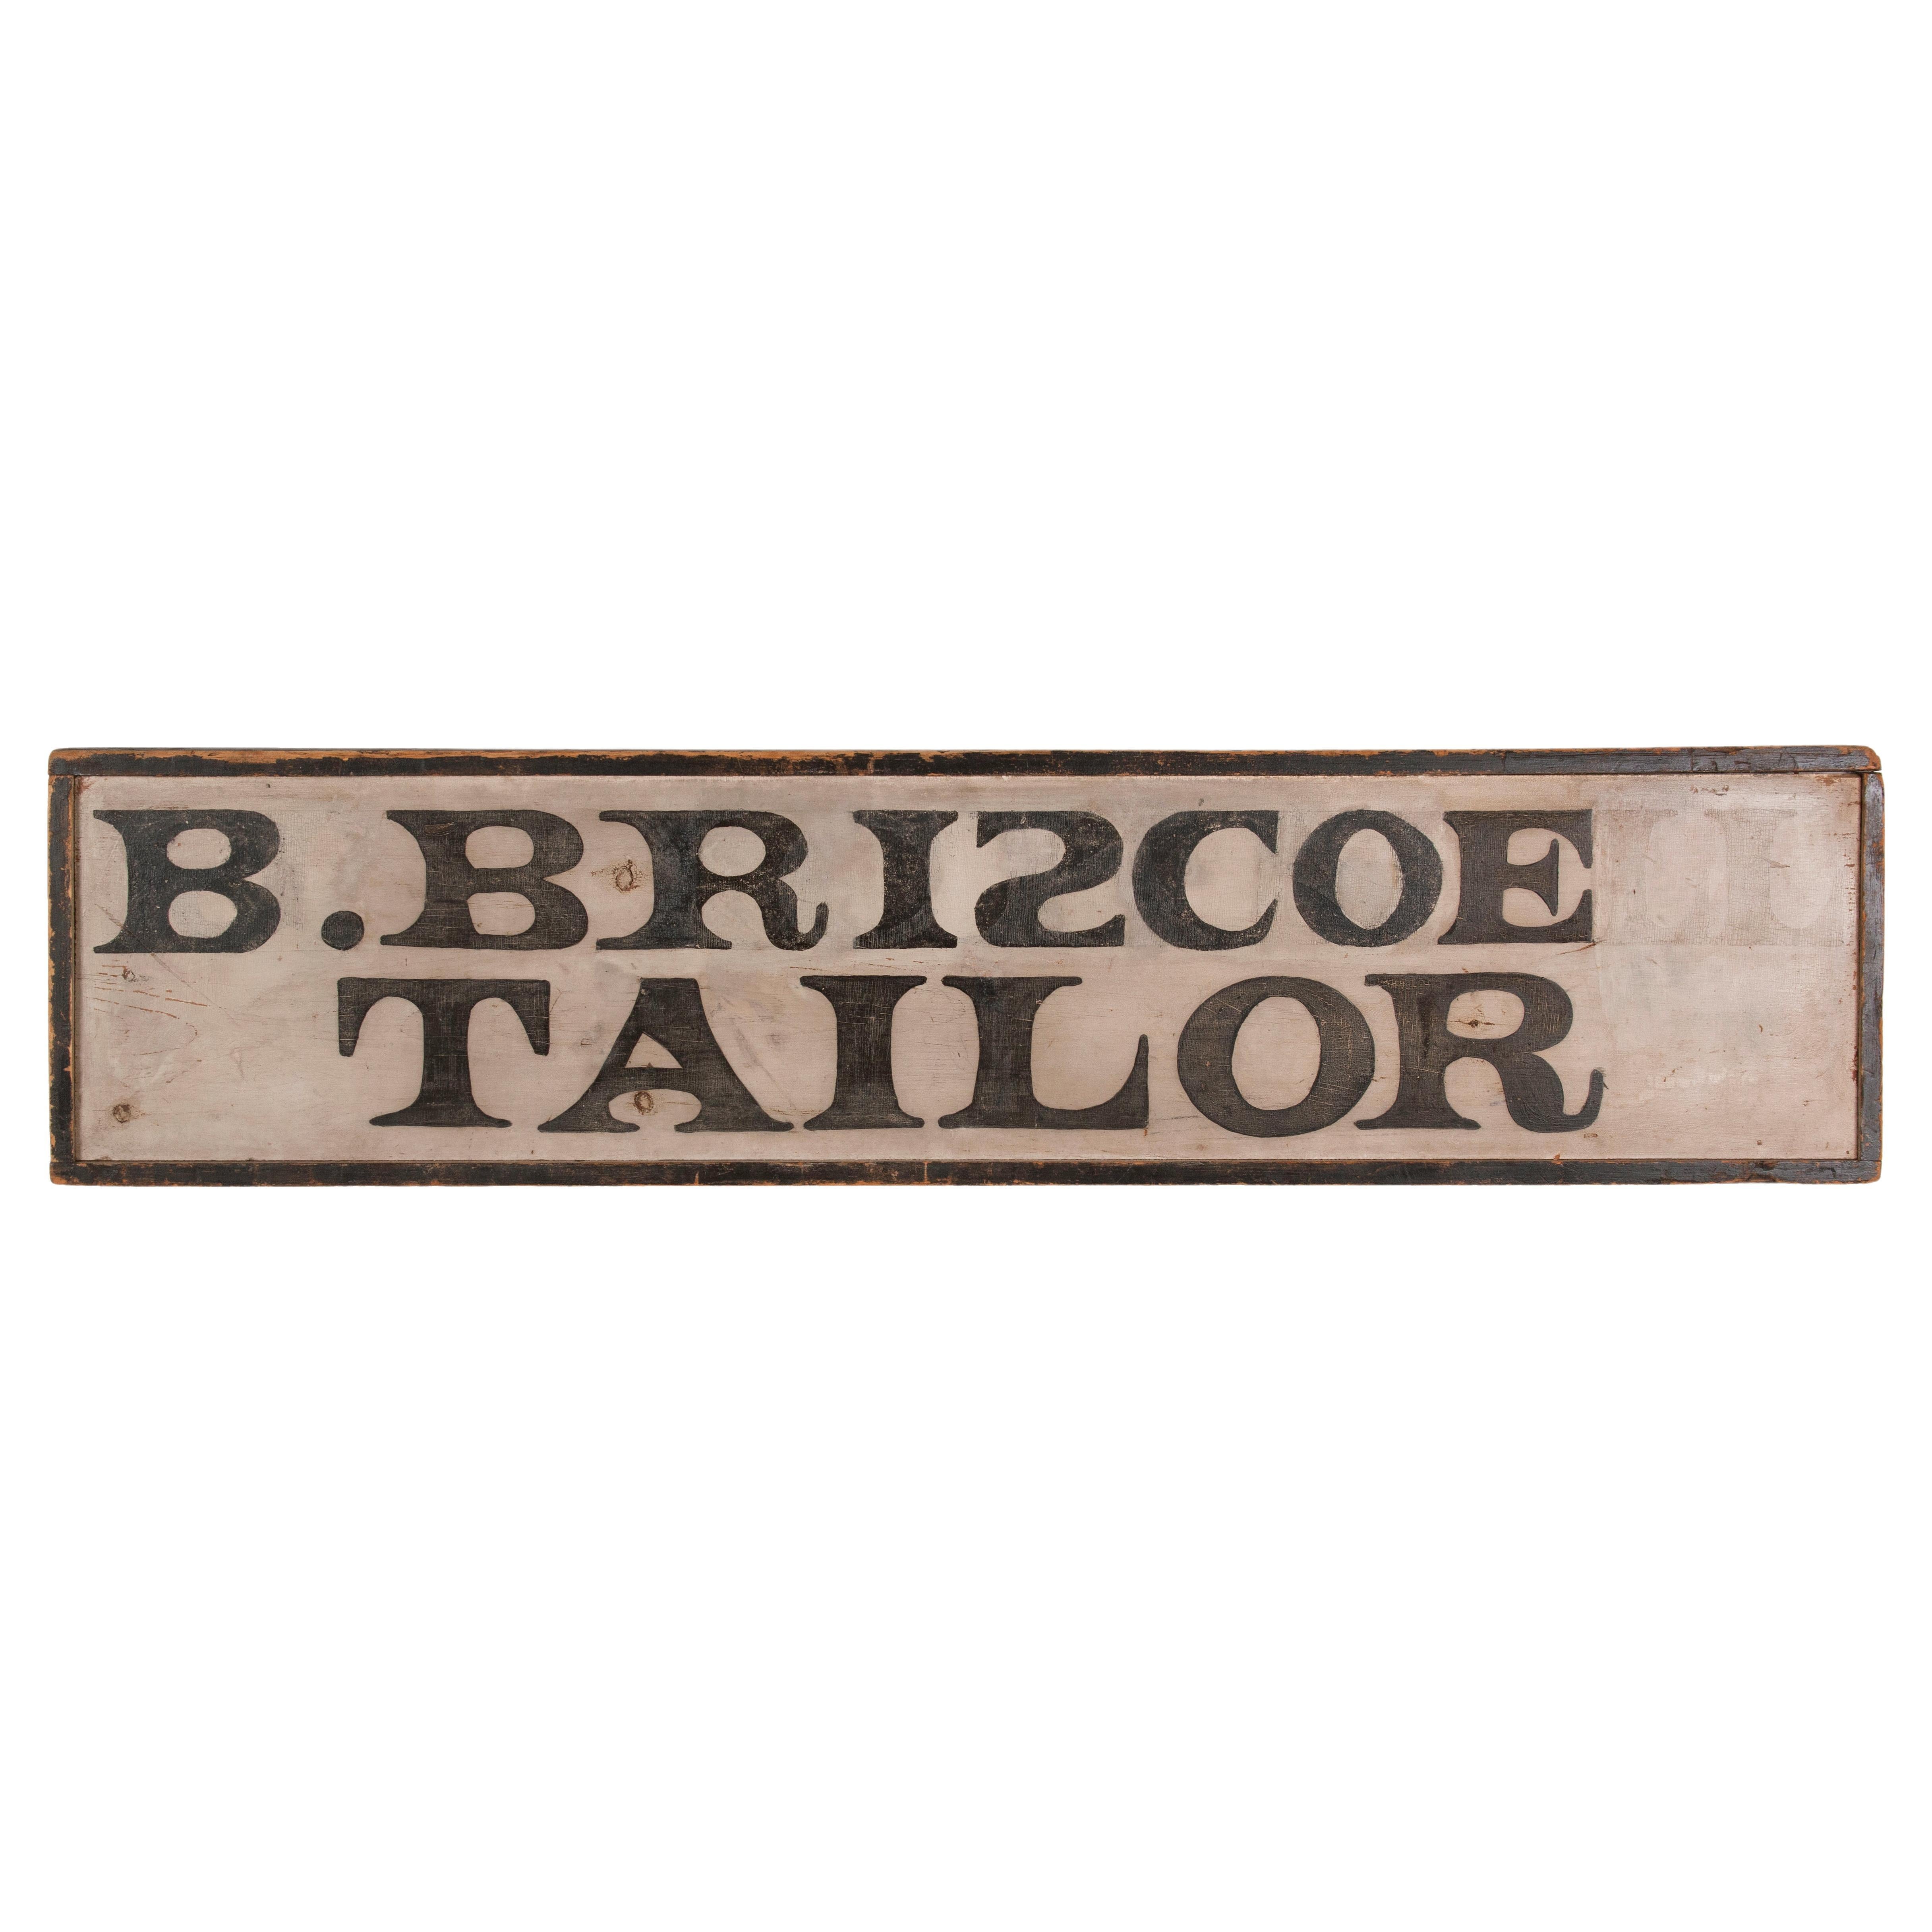 "B. Briscoe, Tailor" Sign with a Backwards S, circa 1810-1850 For Sale